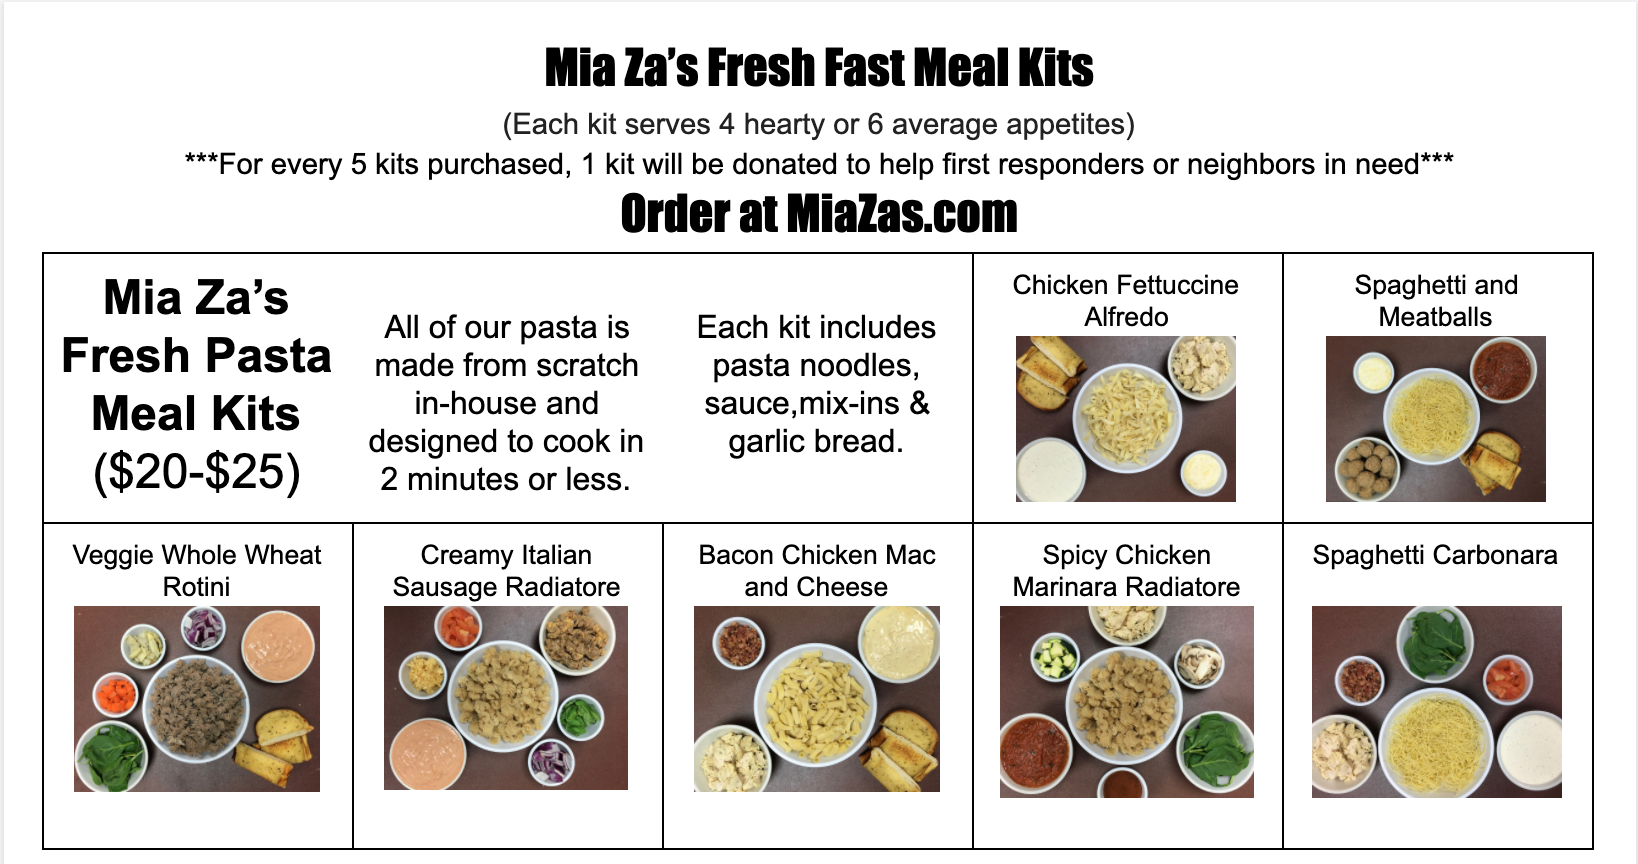 Mia Za’s donating one “meal kit” for every five purchased